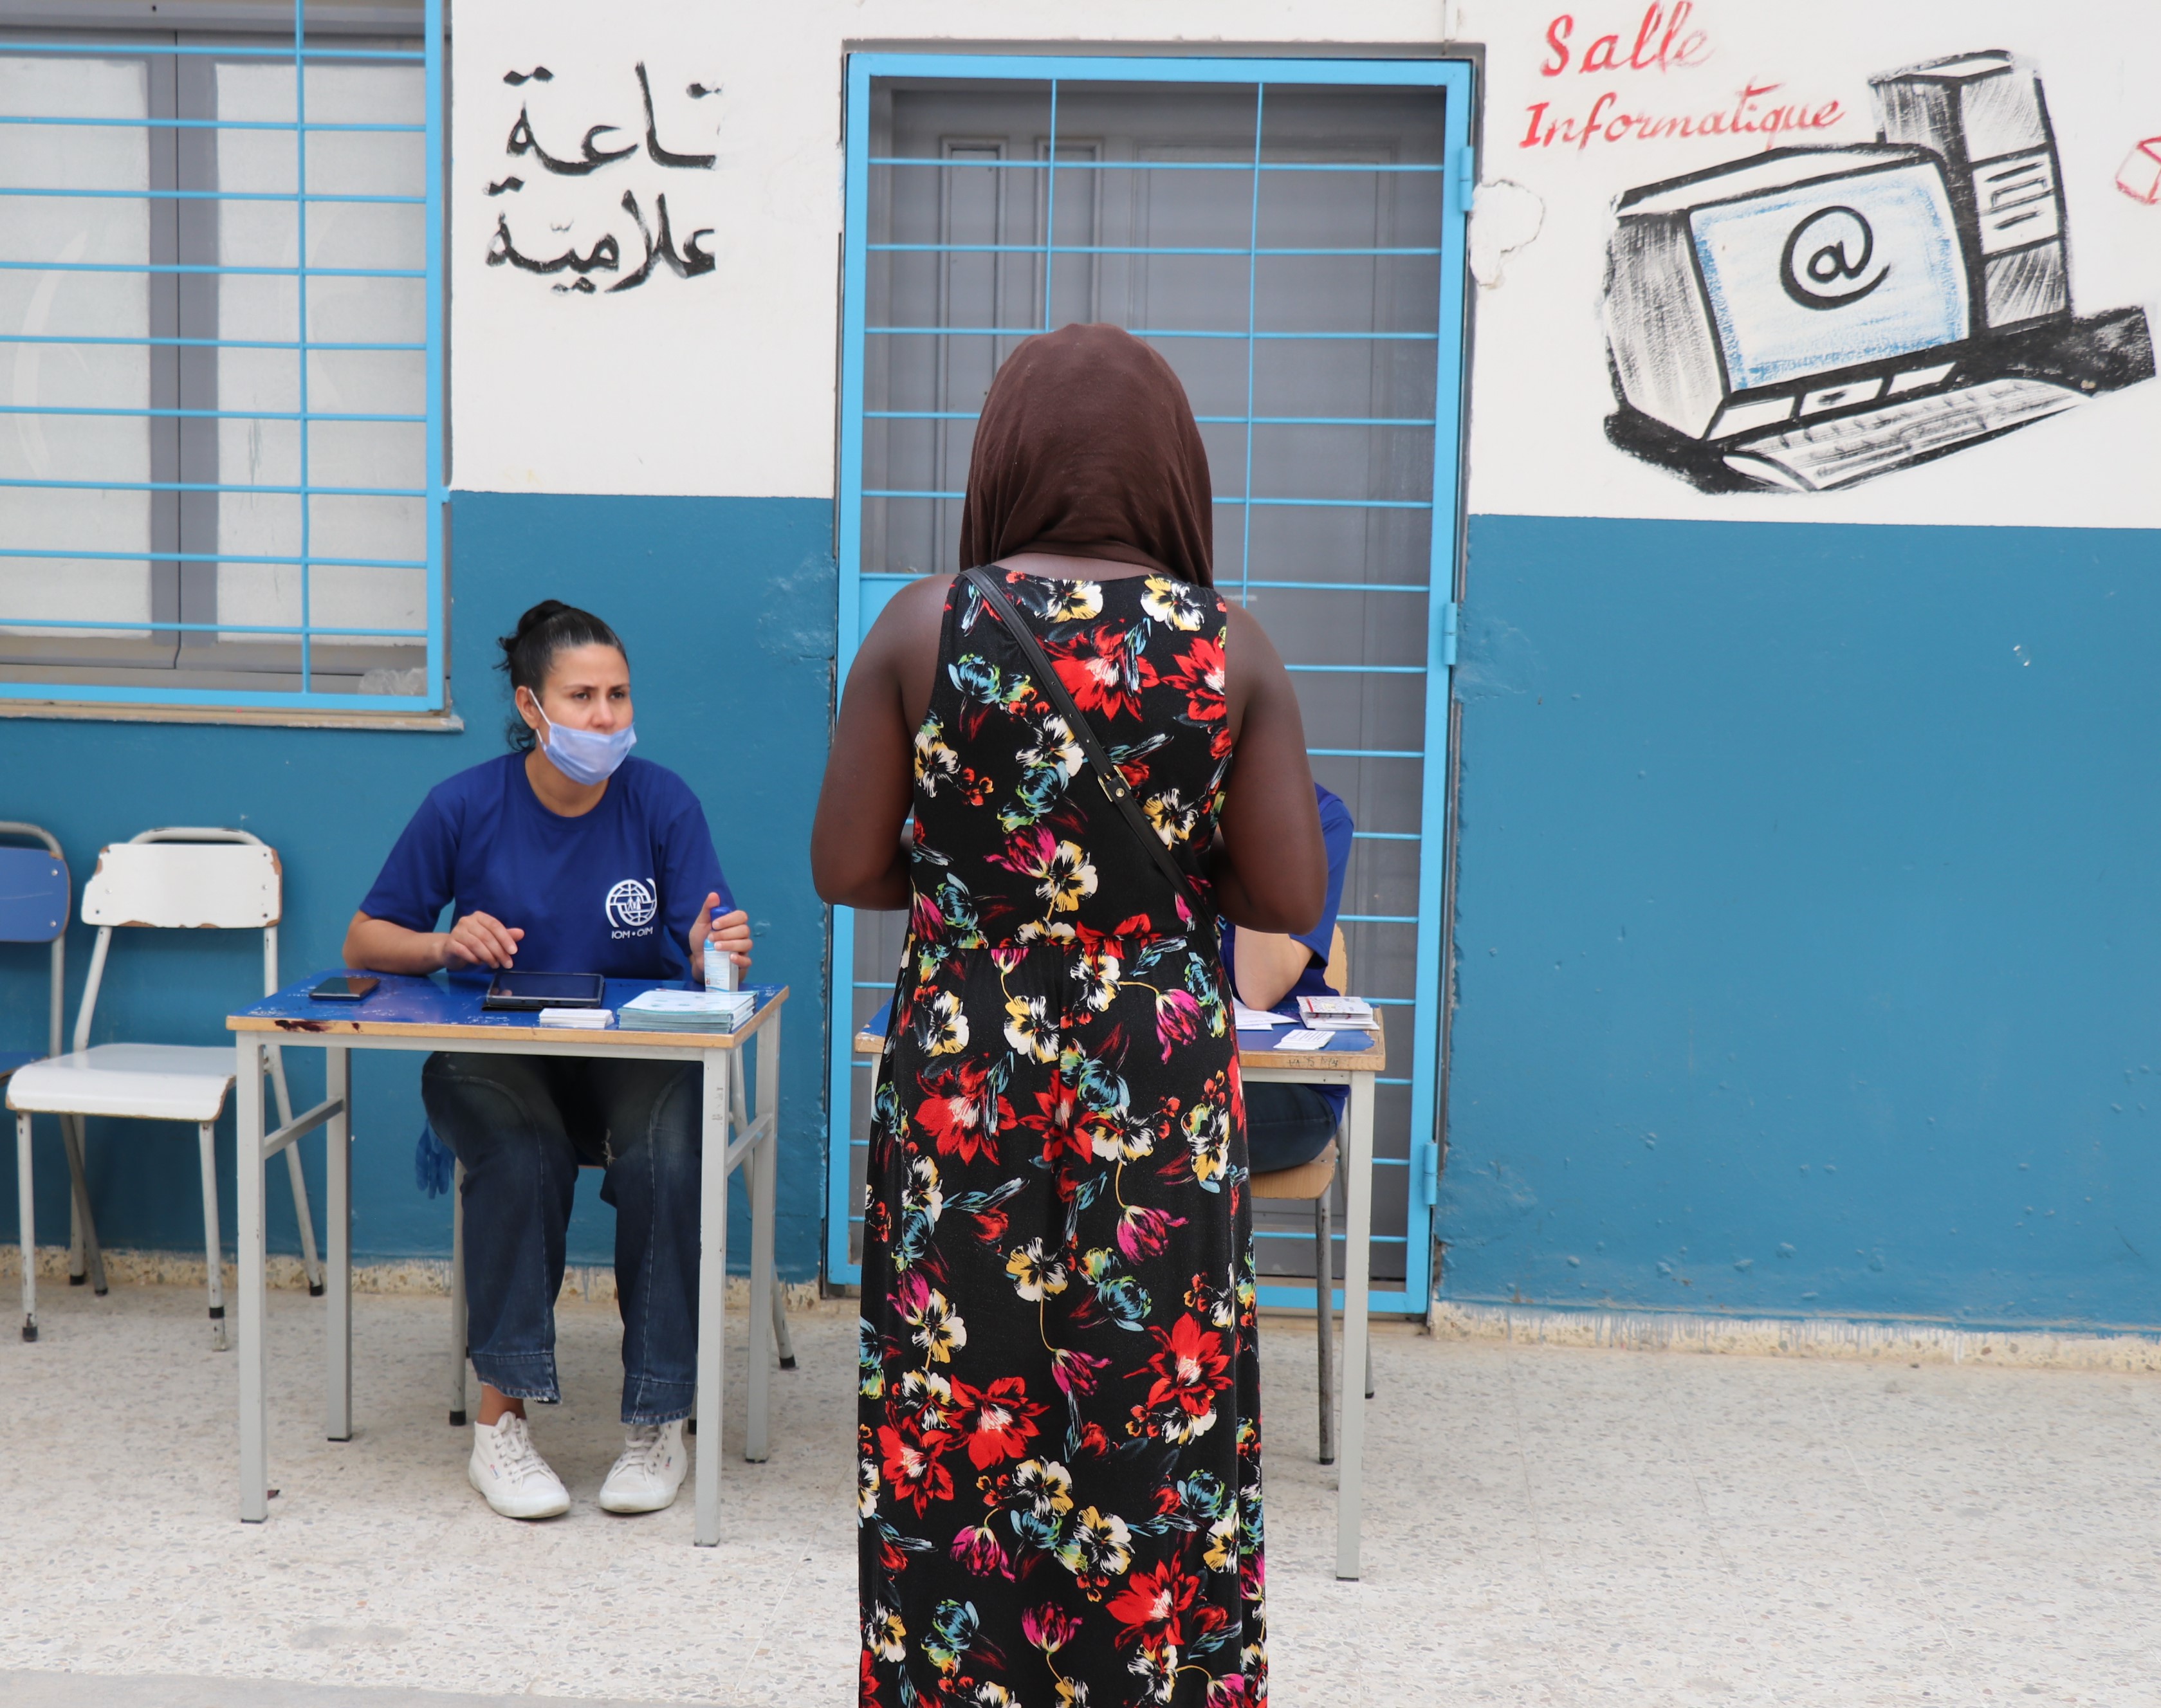 The EU-IOM Joint Initiative delivered vouchers to a migrant in Tunisia. ©IOM